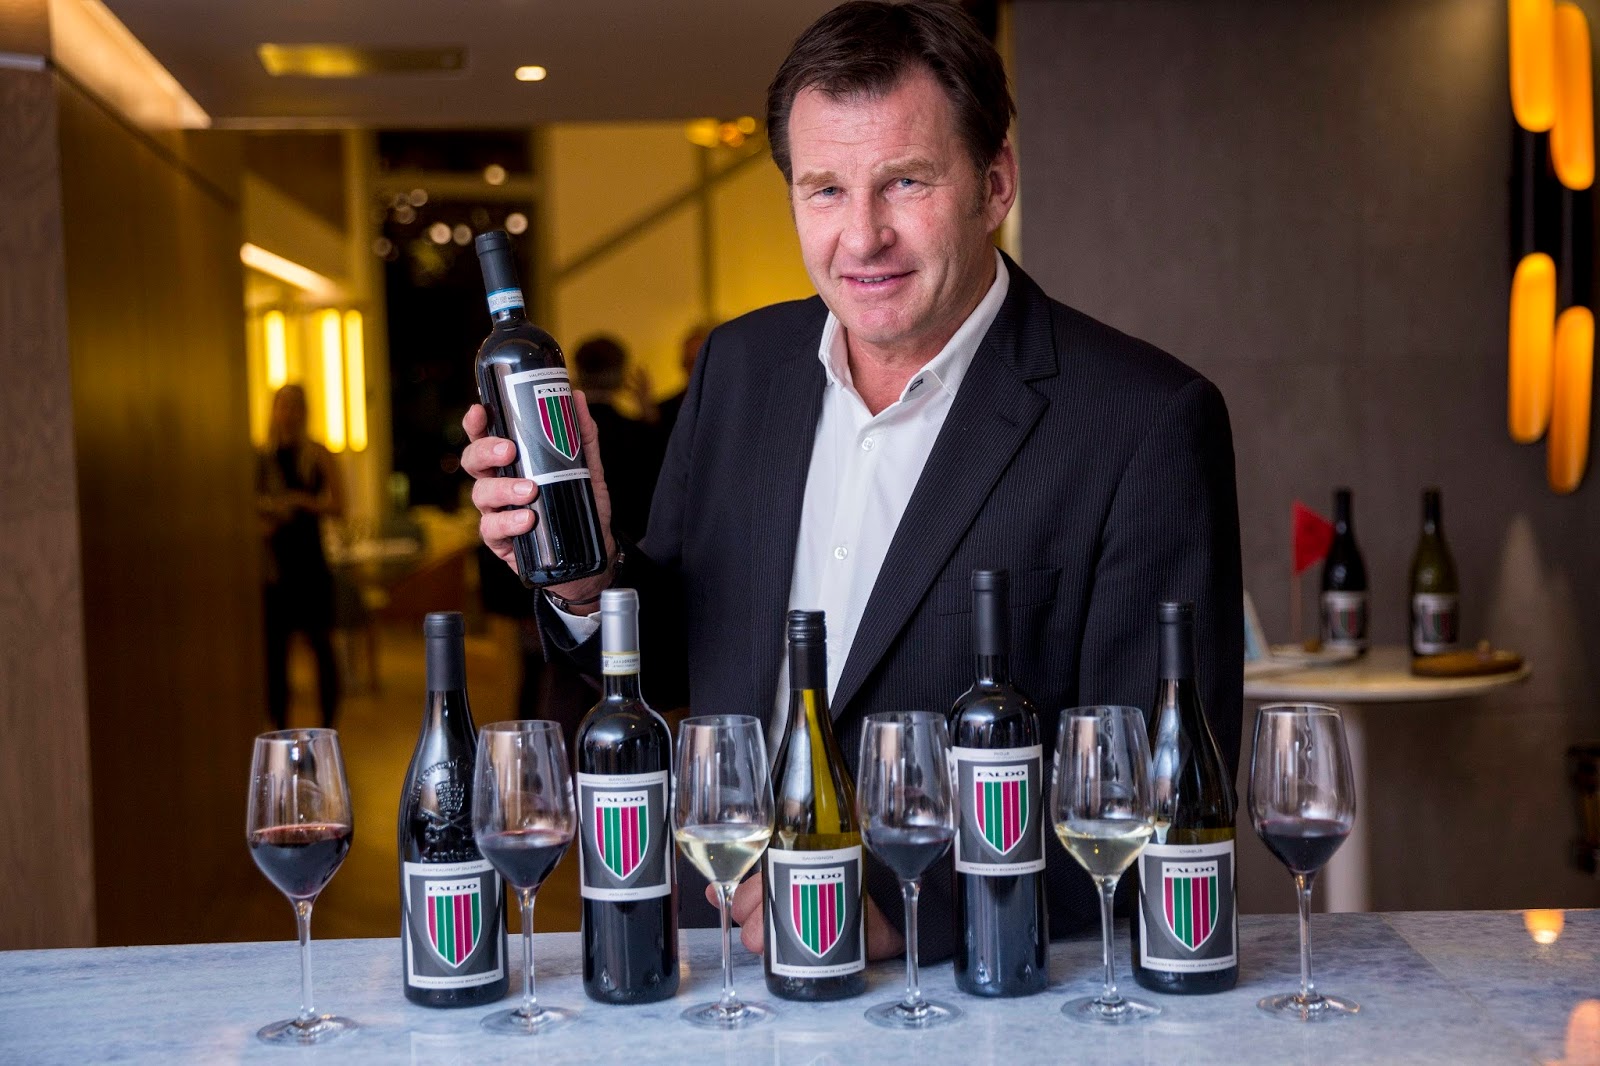 Interview with Sir Nick Faldo at European wine collection launch | Vinspire